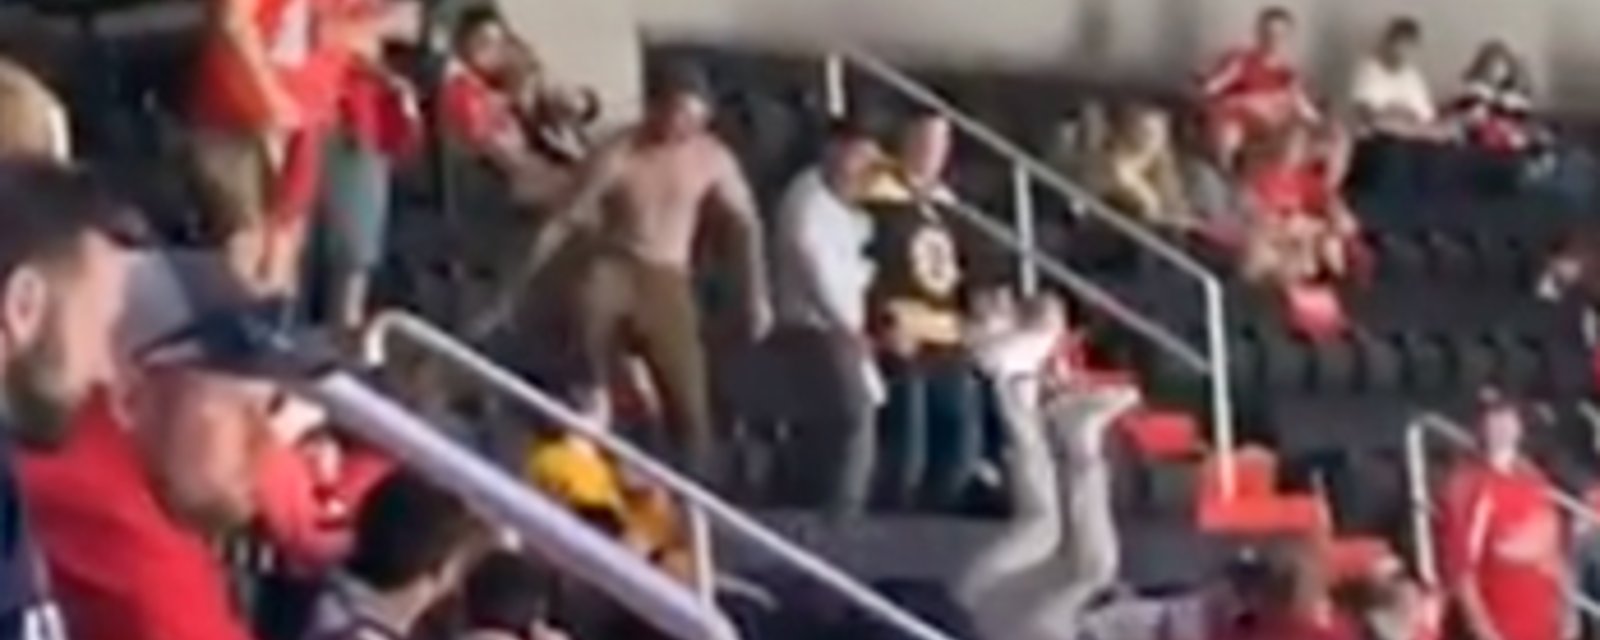 A fight breaks out in the nosebleeds in Game 2 of Capitals vs Bruins